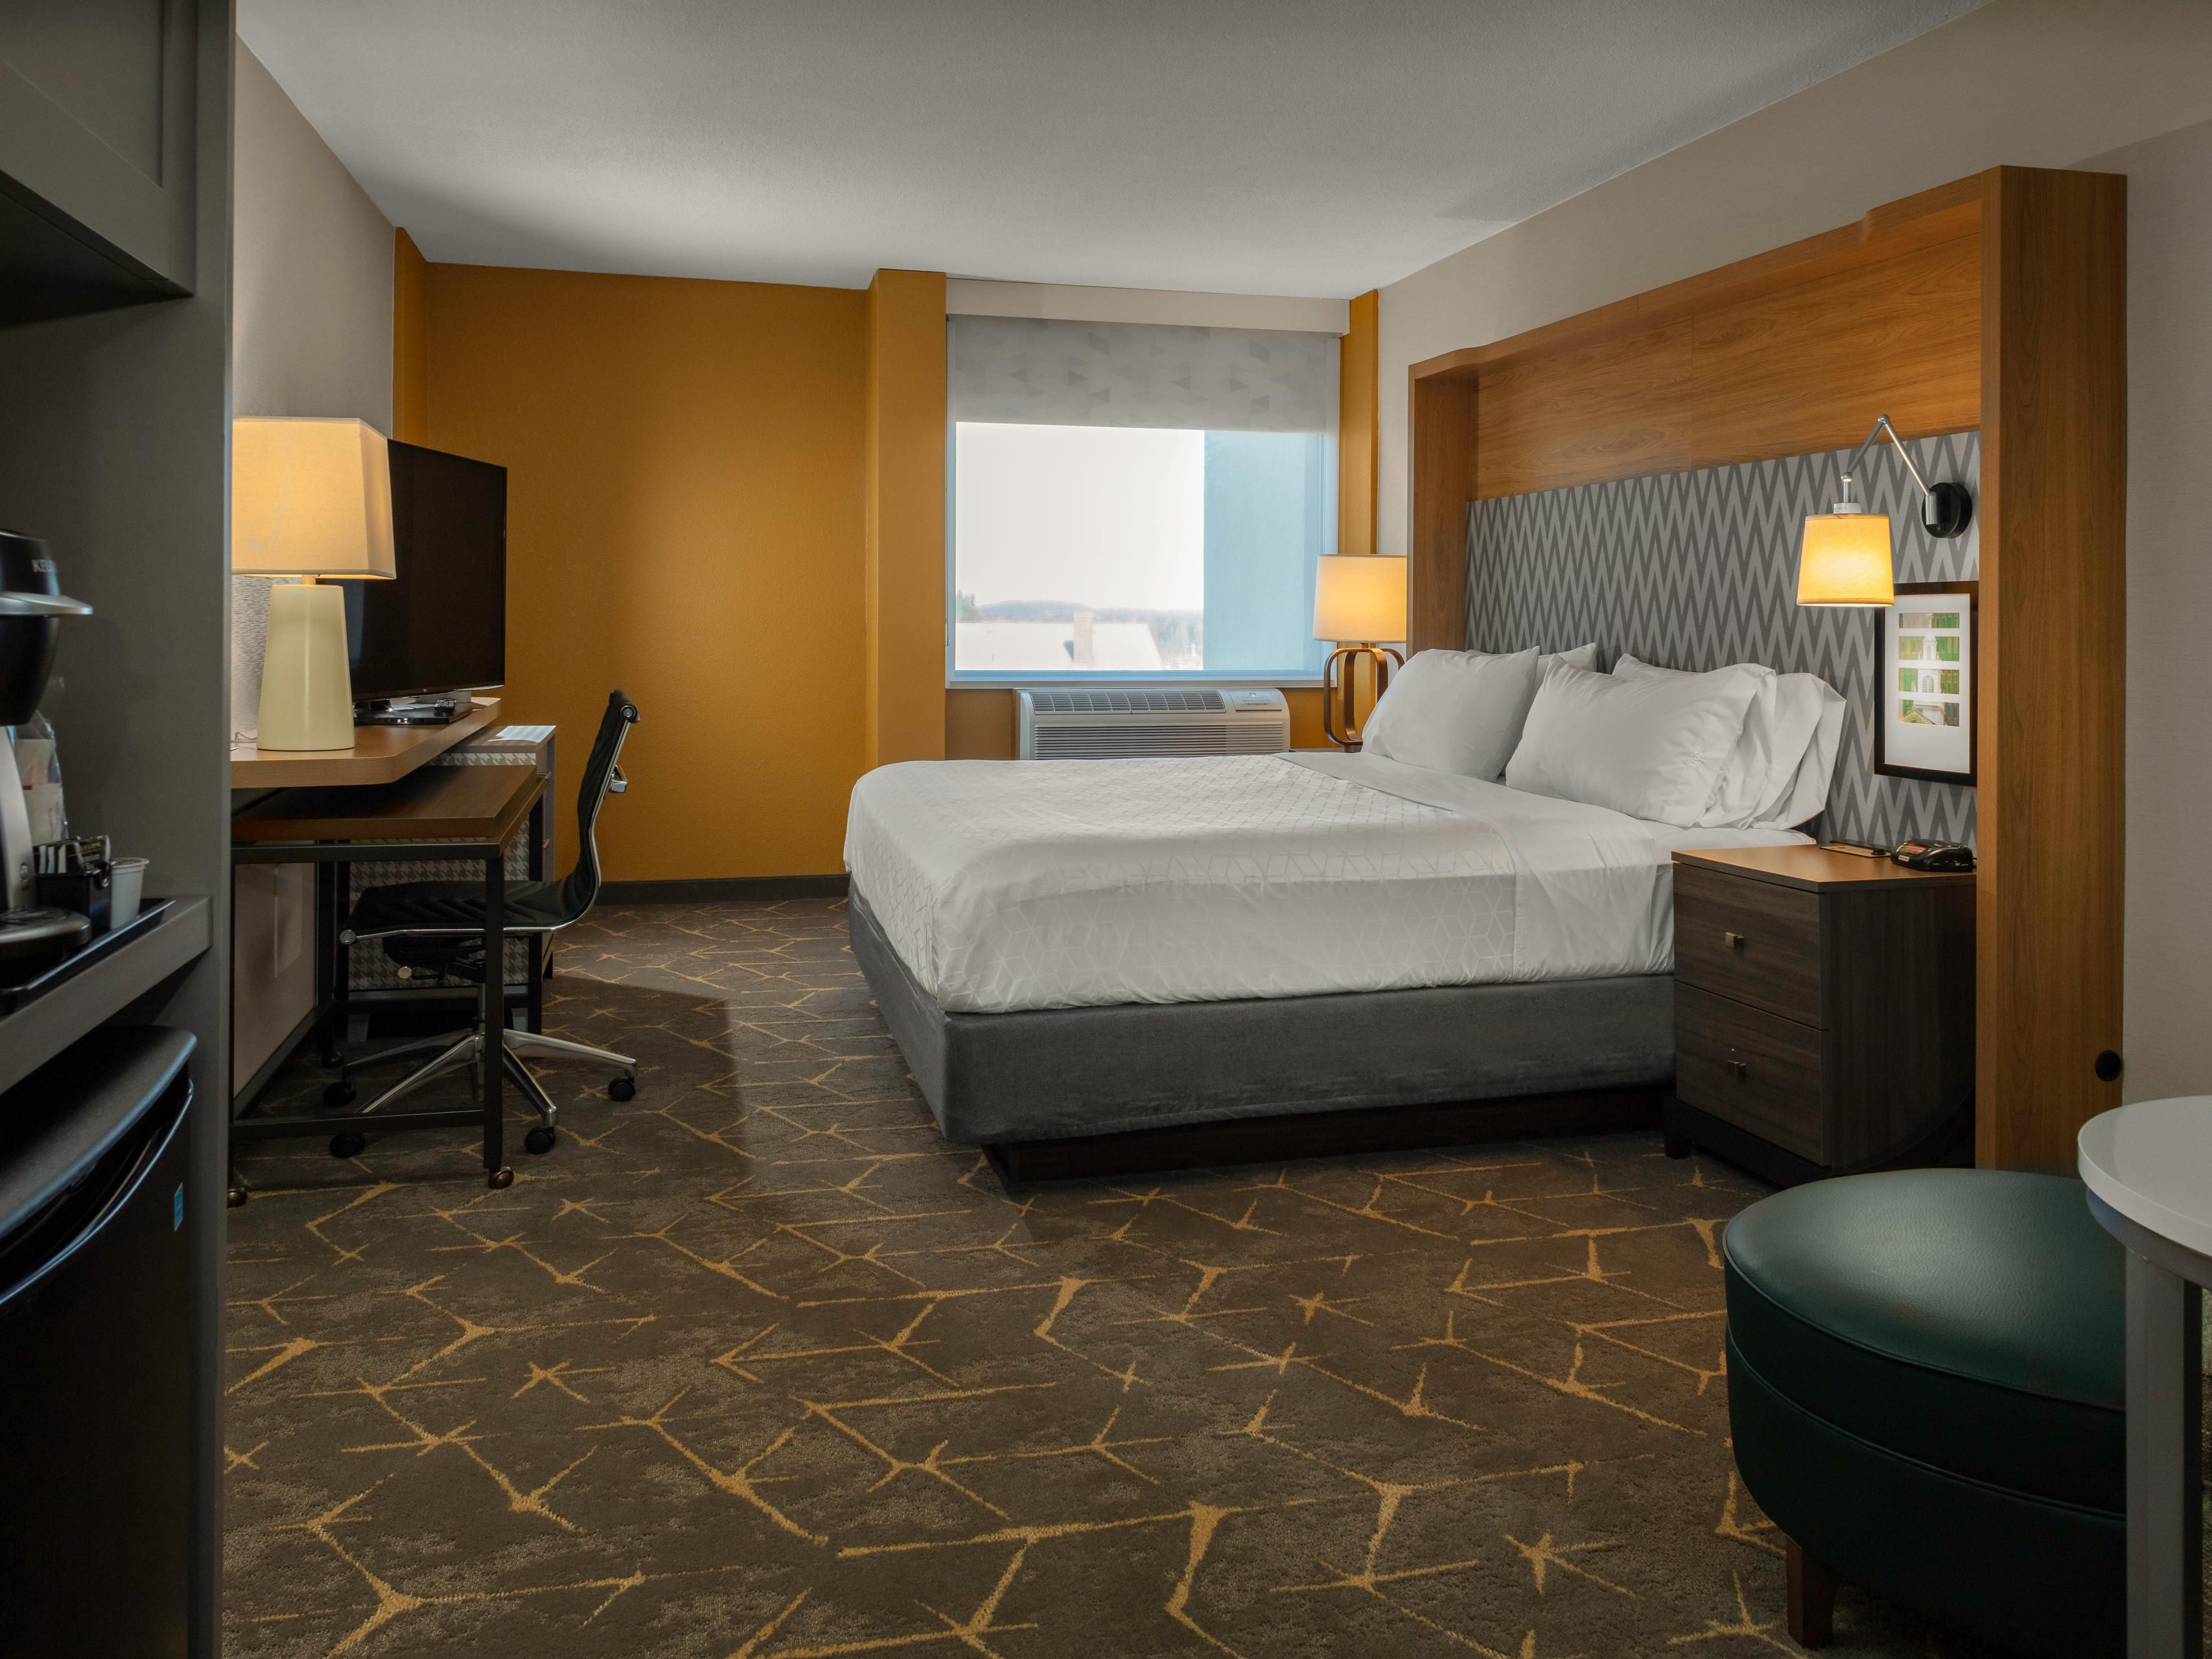 Guests to our hotel are only a short drive or train ride from downtown Boston, Fenway Park, Logan International Airport, and the site of the Boston Tea Party. The hotel is also only steps from delicious dining and nightlife options at Legacy Place.